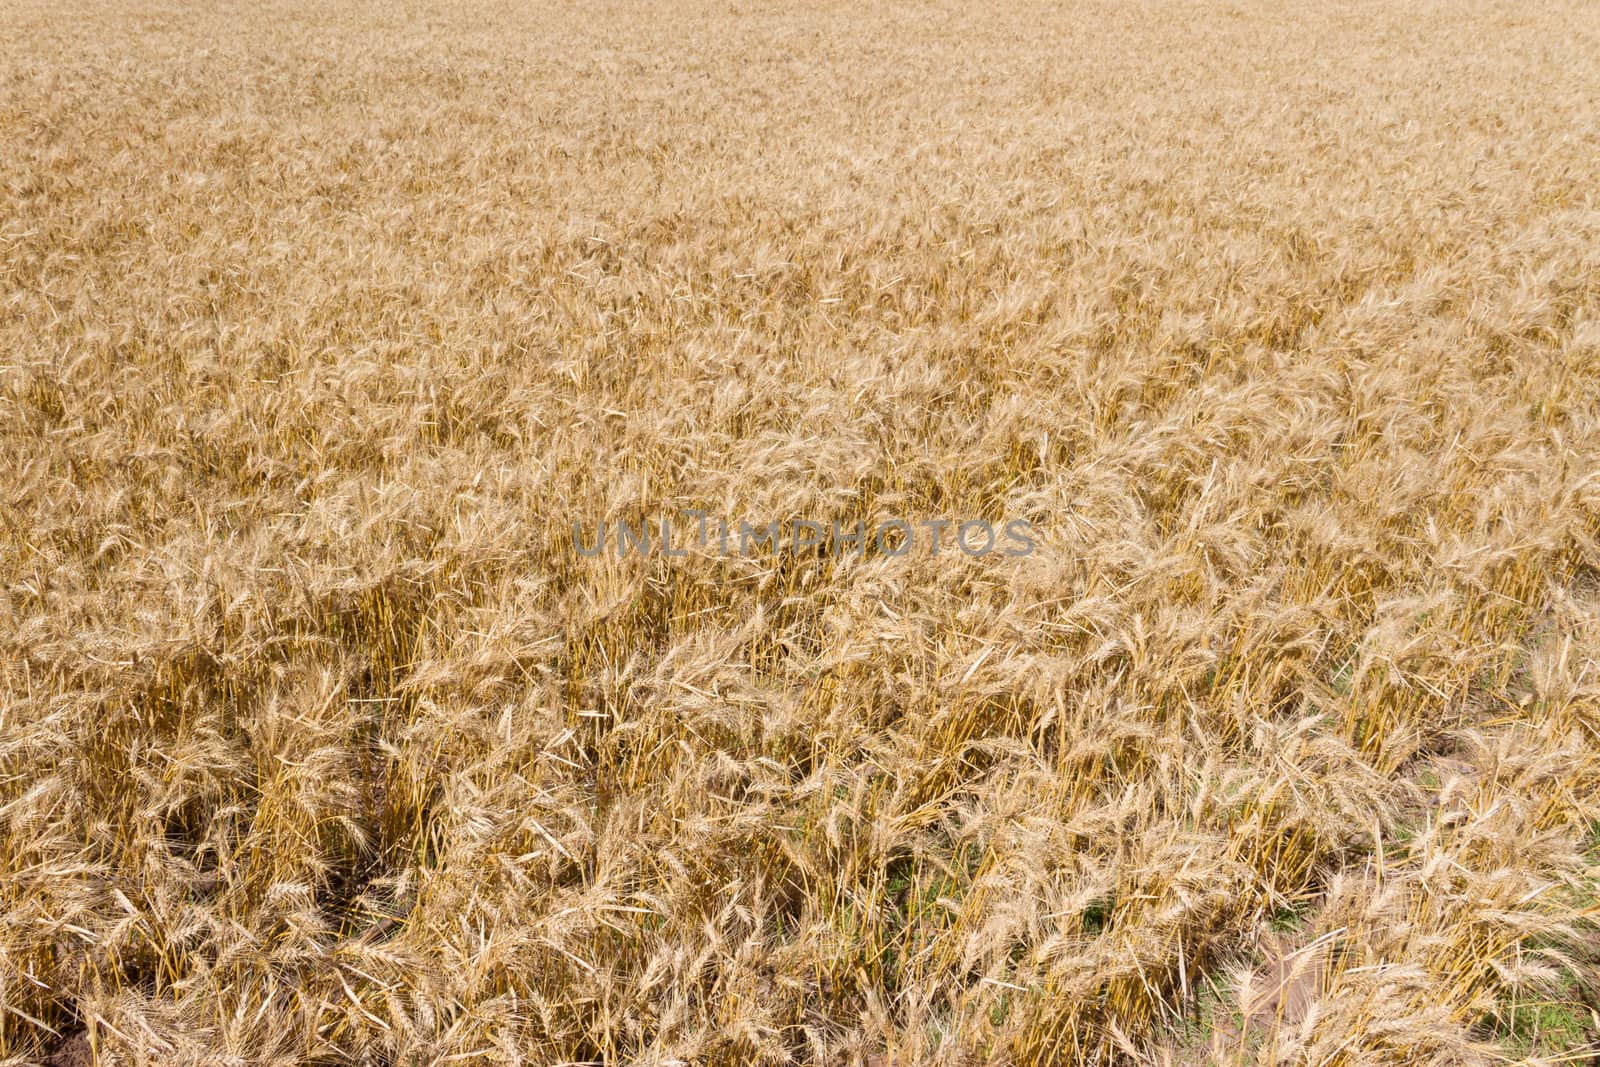 the golden wheat under the sun in the field plantations